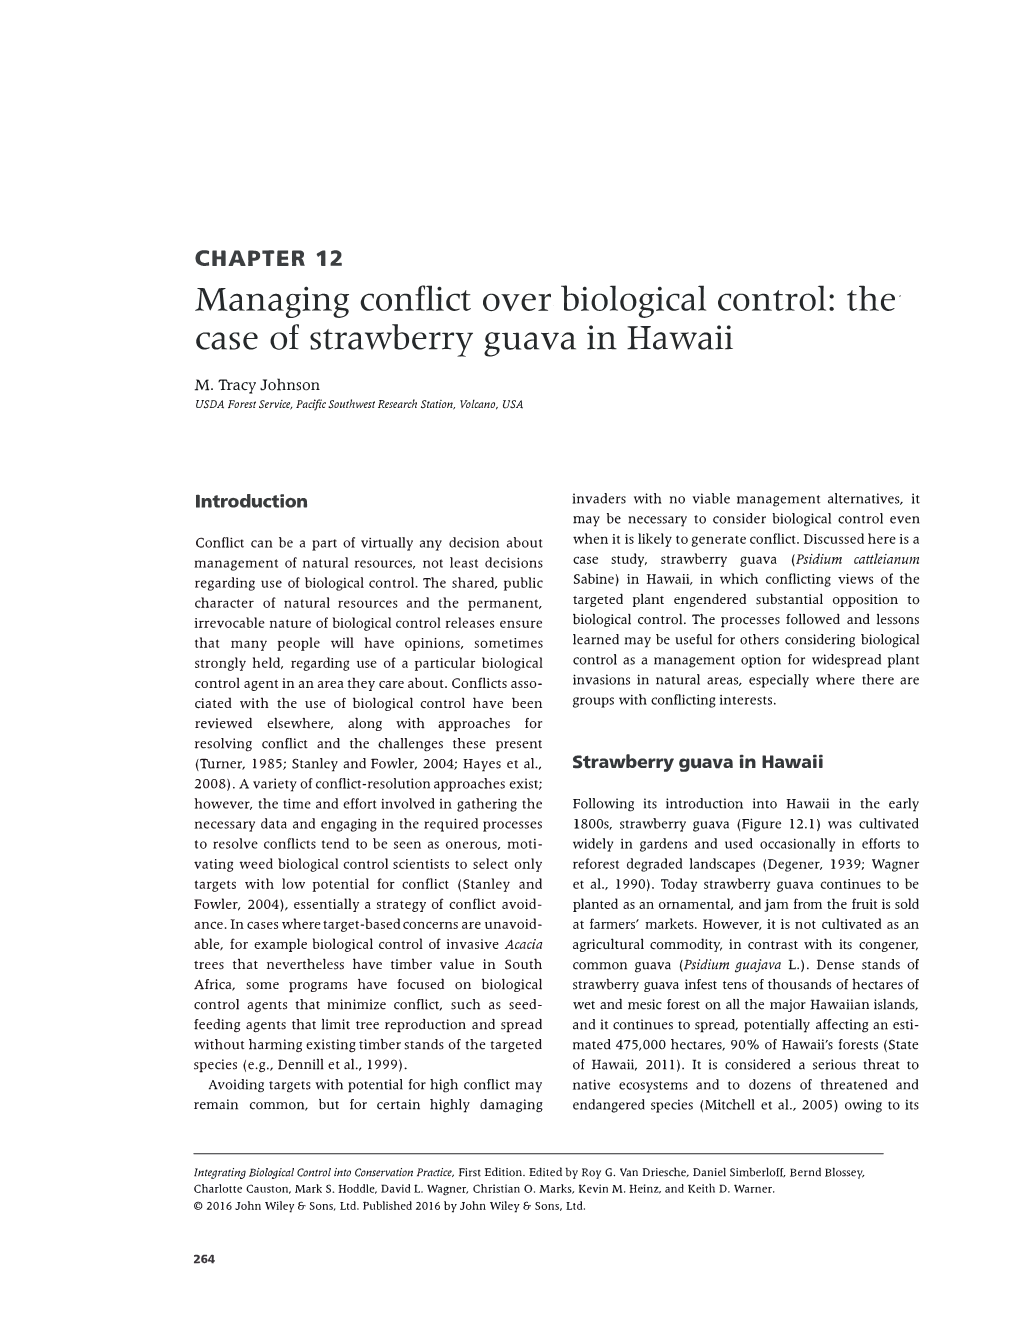 The Case of Strawberry Guava in Hawaii